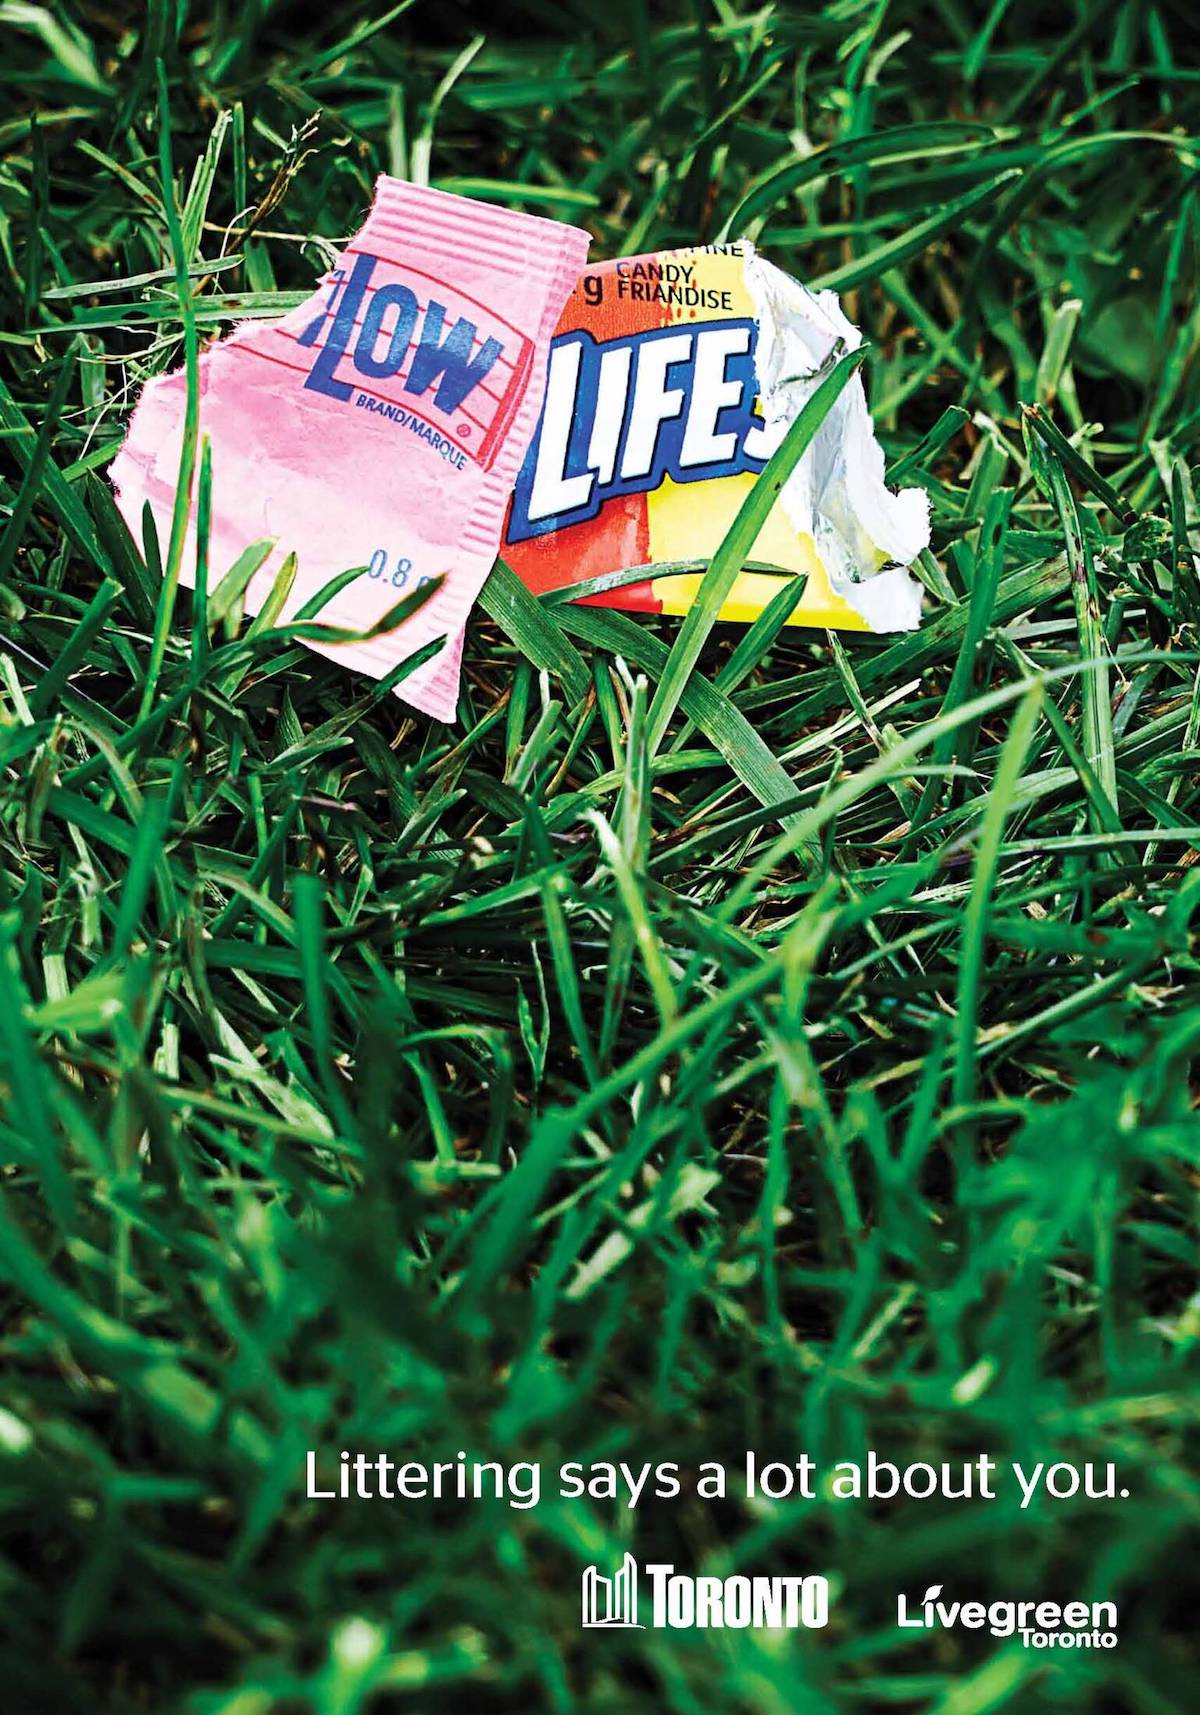 Live Green Toronto - Littering says a lot about you (Low life)